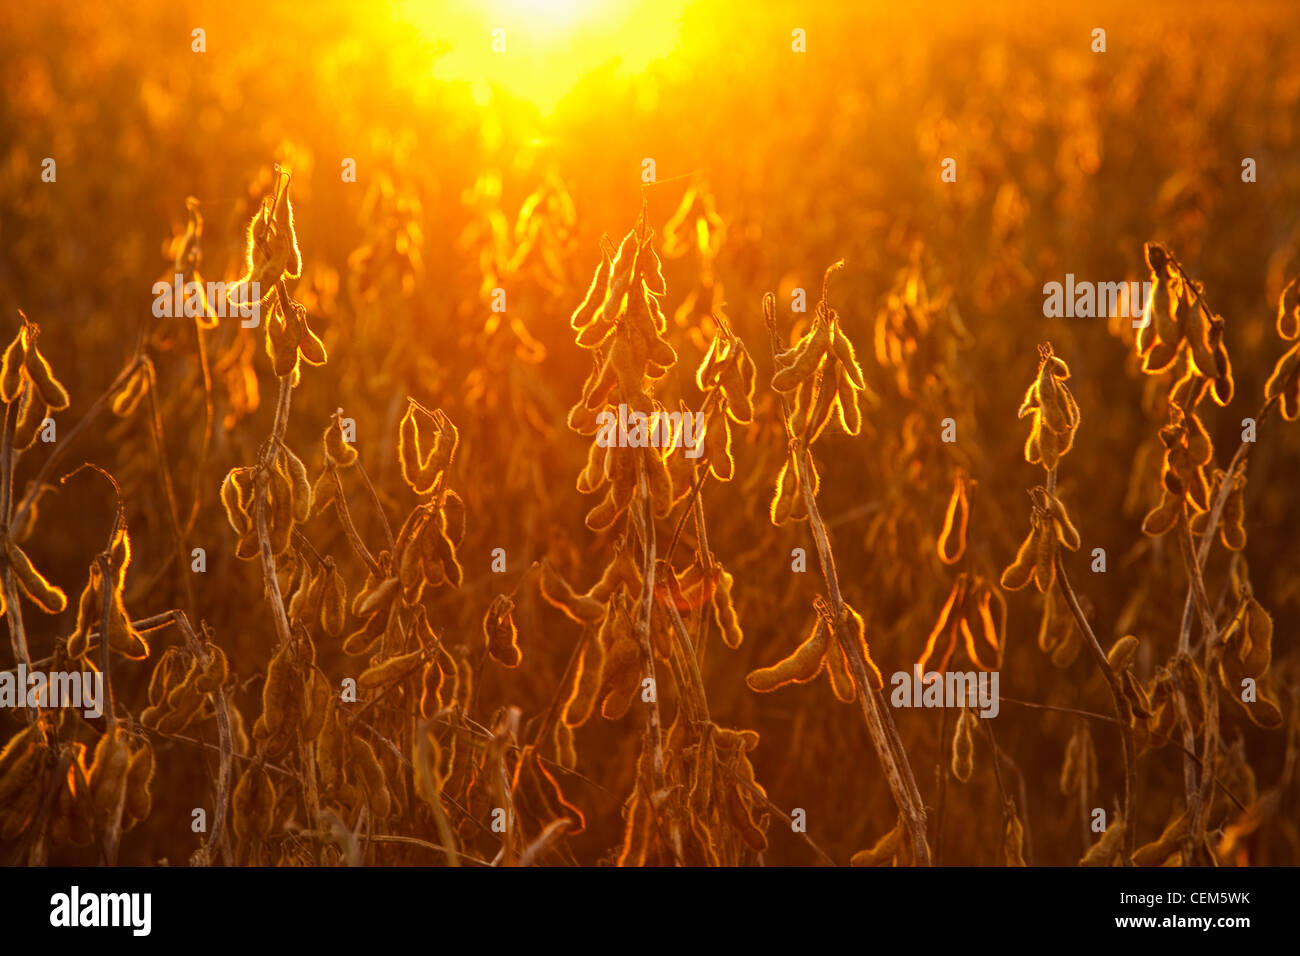 Agriculture - Mature harvest stage soybean pods on the plant, backlit by the sunset / near Little Rock, Arkansas, USA. Stock Photo